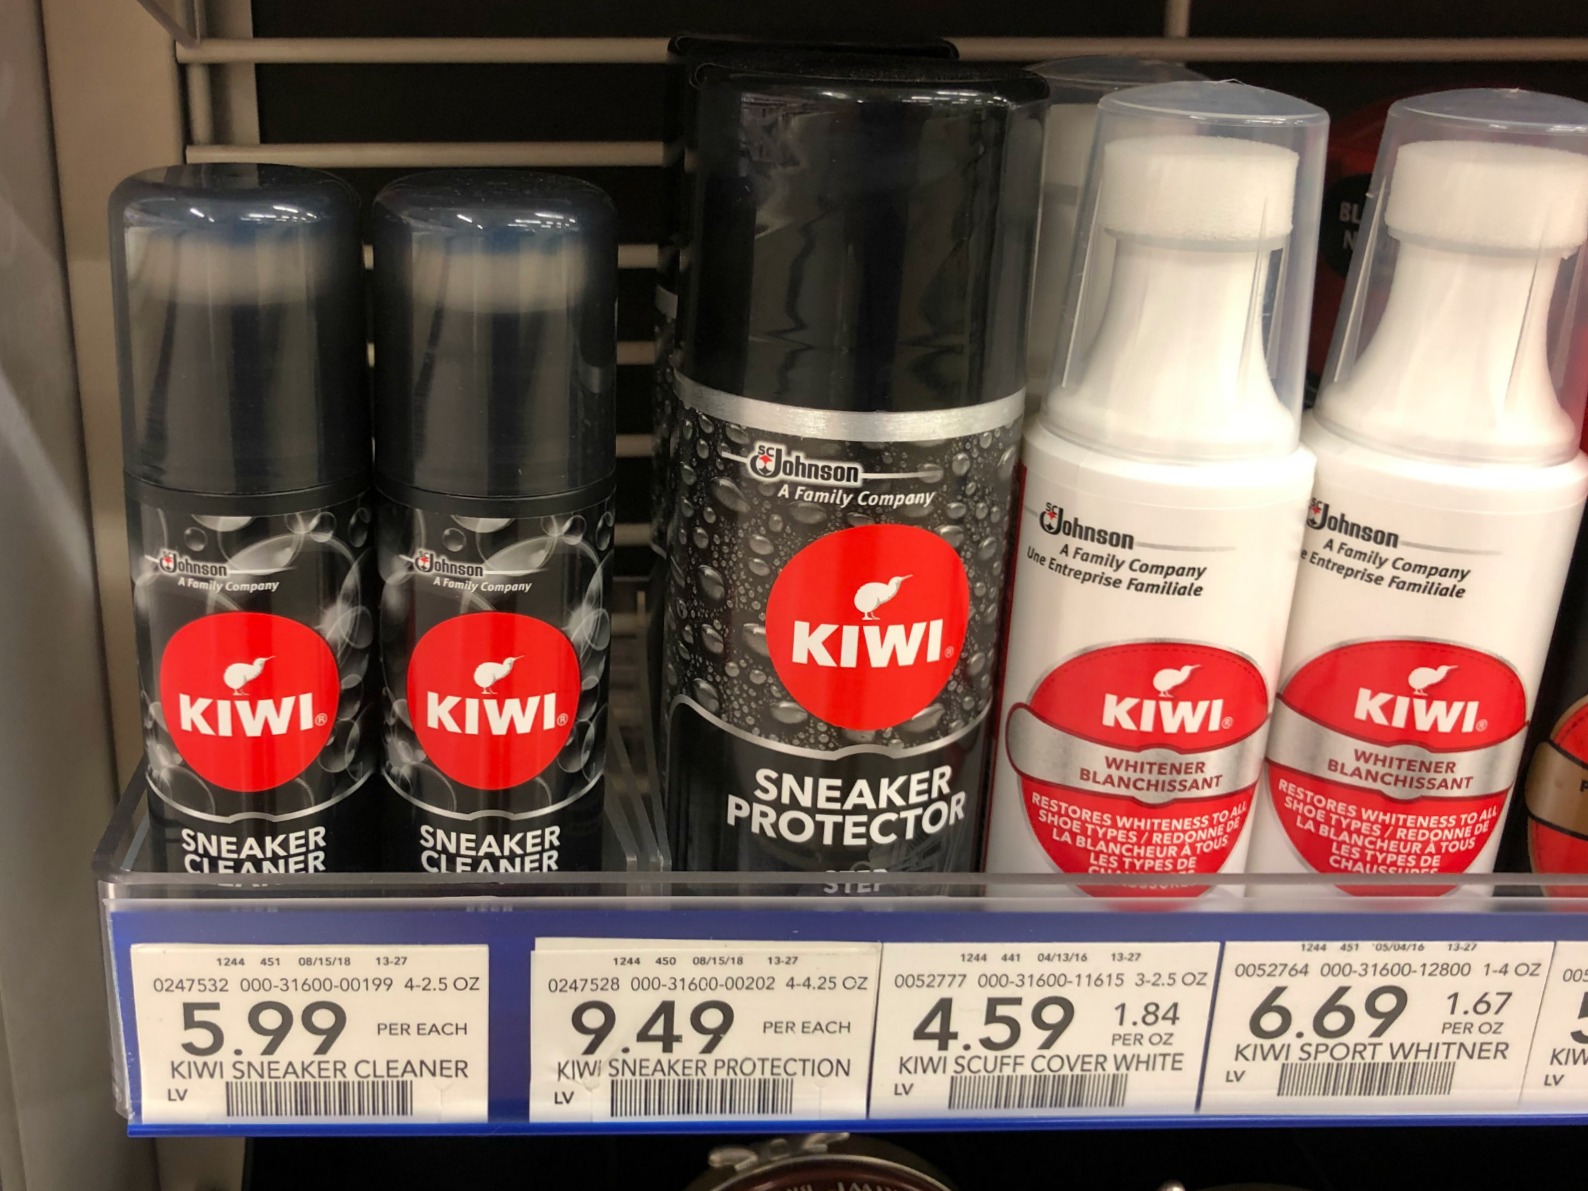 Look For A Big Selection Of KIWI® Shoe Care Products At Publix And Keep Your Shoes Looking Their Best